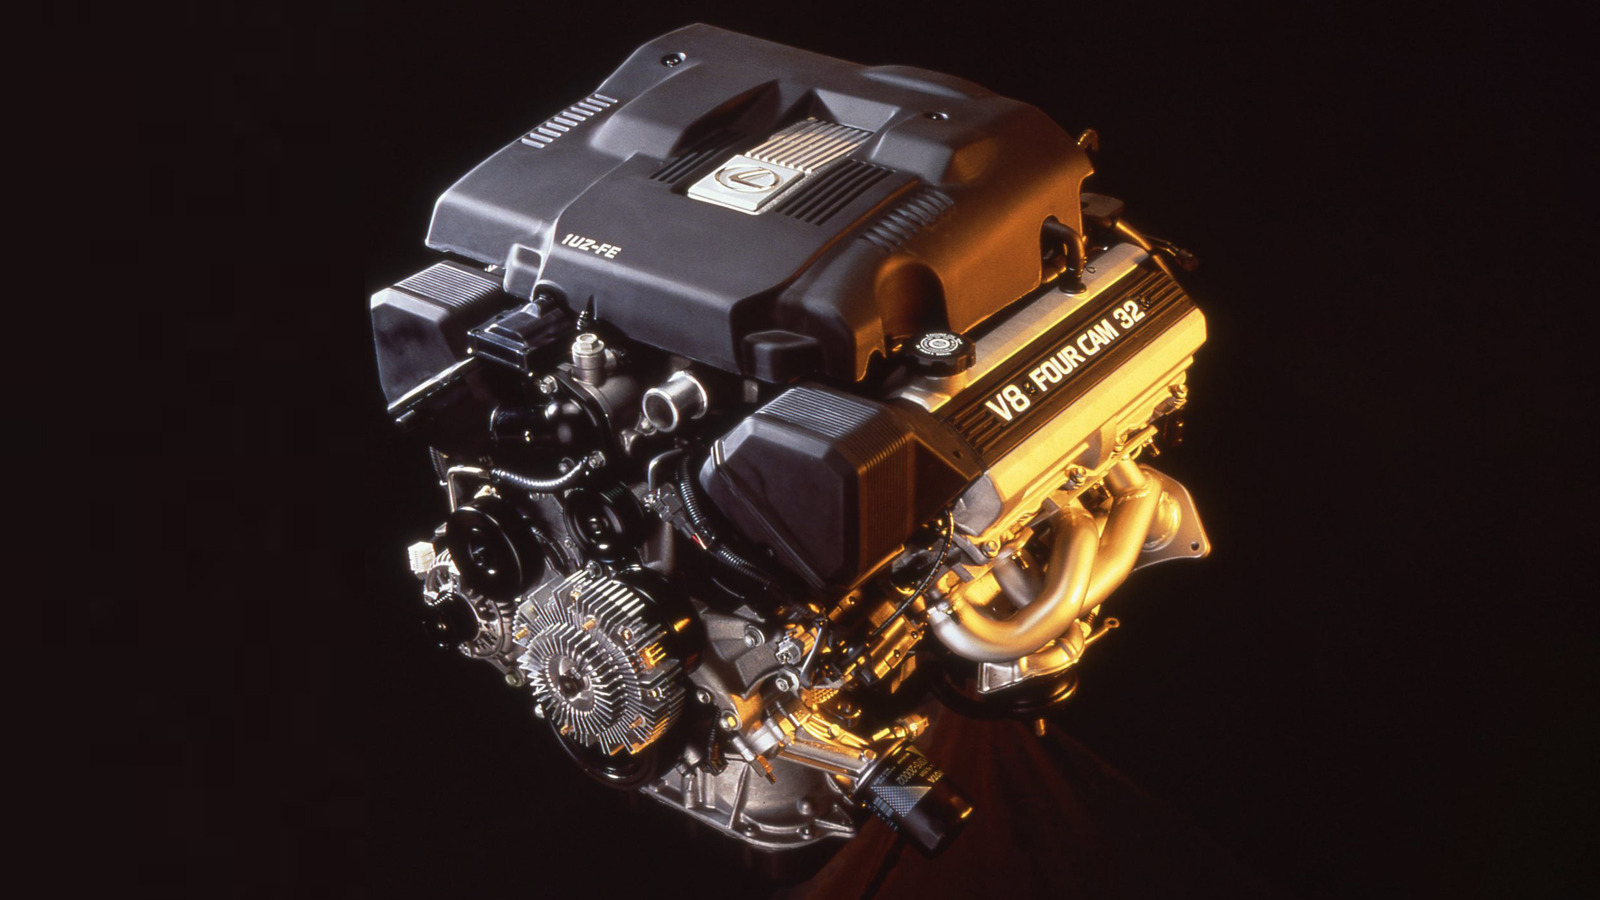 10 Of The Most Reliable JDM Engines Ever Built